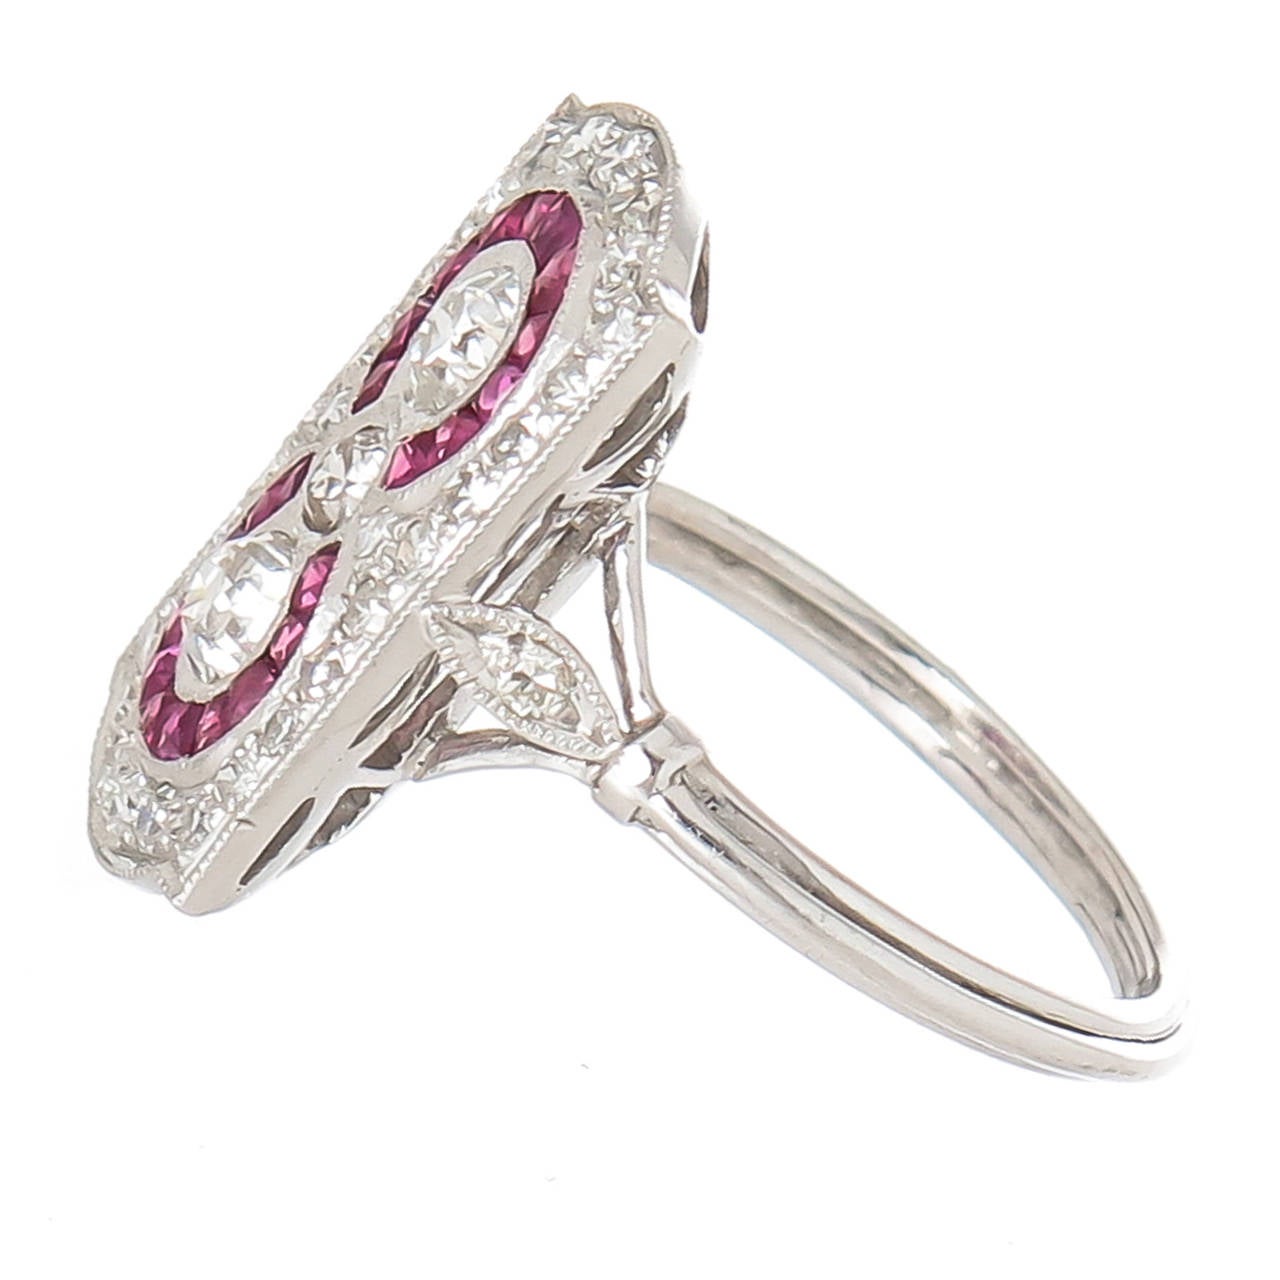 Circa 1930s Platinum Diamond and Ruby Ring, European cut Diamonds totaling approximately 1 Carat with two circles of fine color Swiss Cut Rubies. Finger size = 6